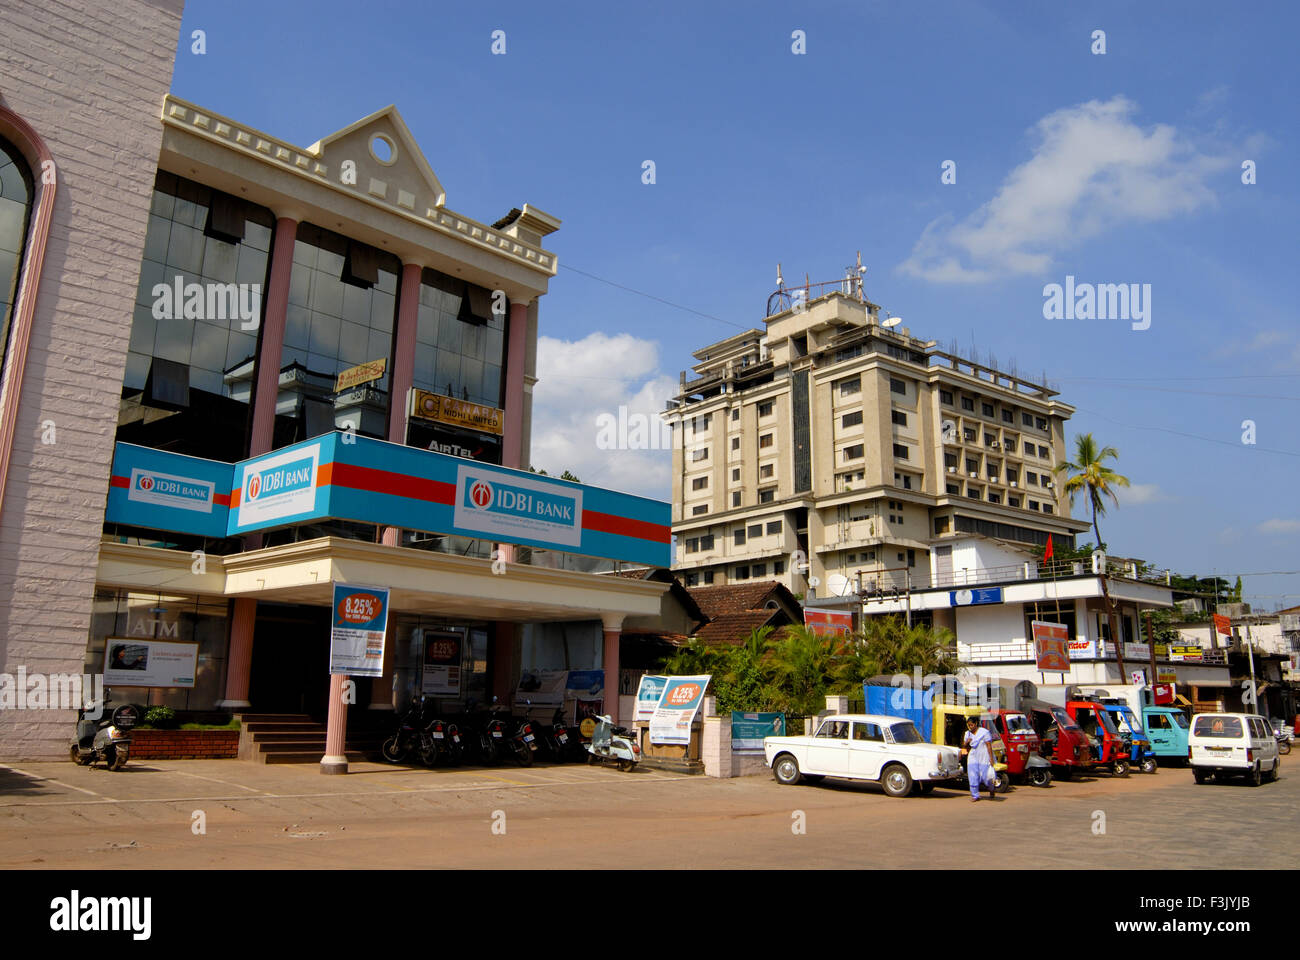 Busy street with modern structures for shops and residence at main city of Udupi Karnataka India Stock Photo